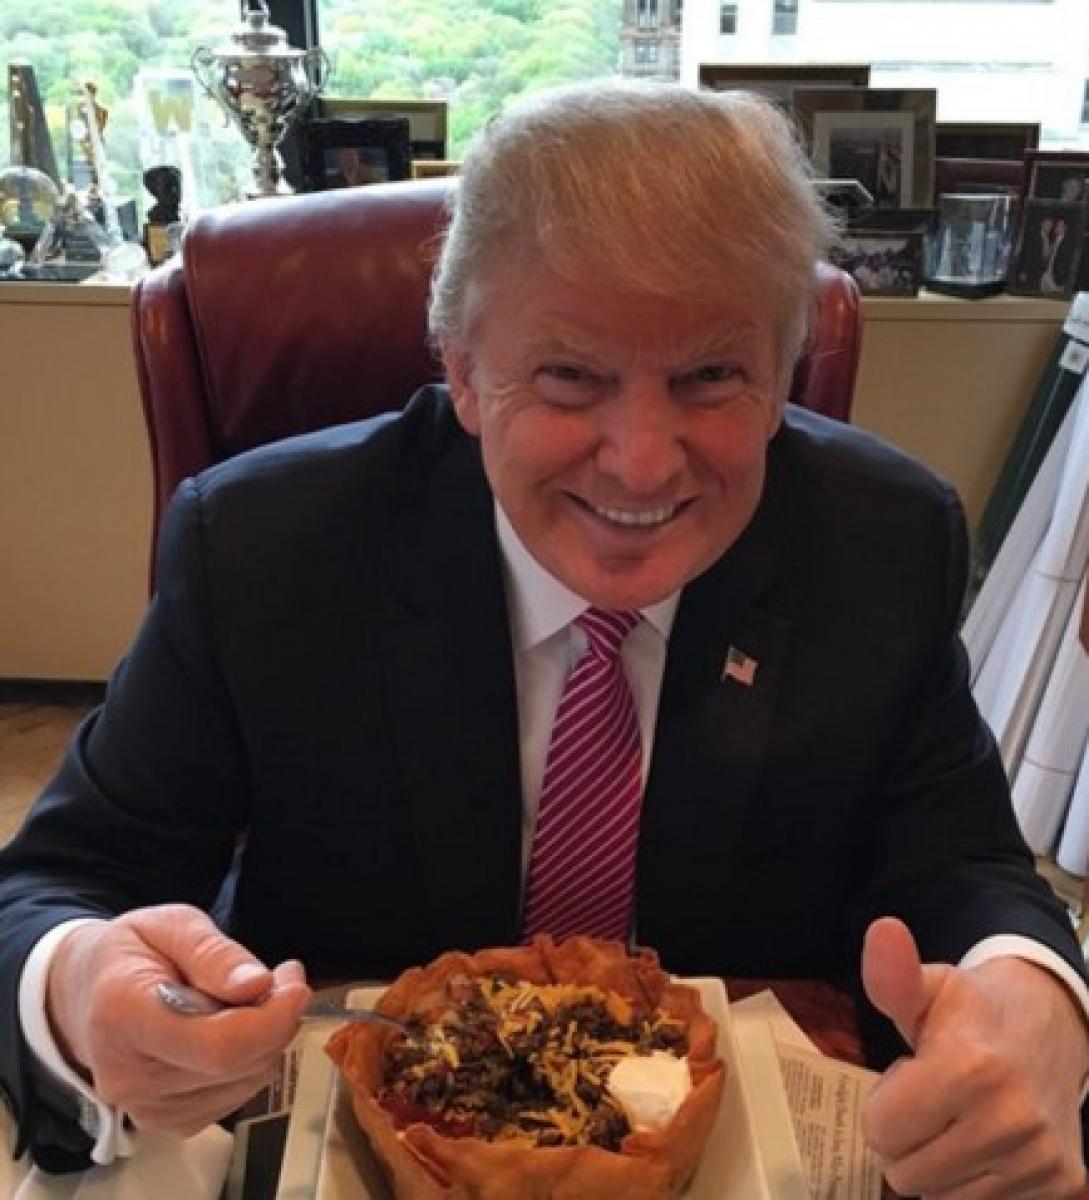 Trump Uses Taco Bowl in an Attempt To Reach Out To Hispanic Voters